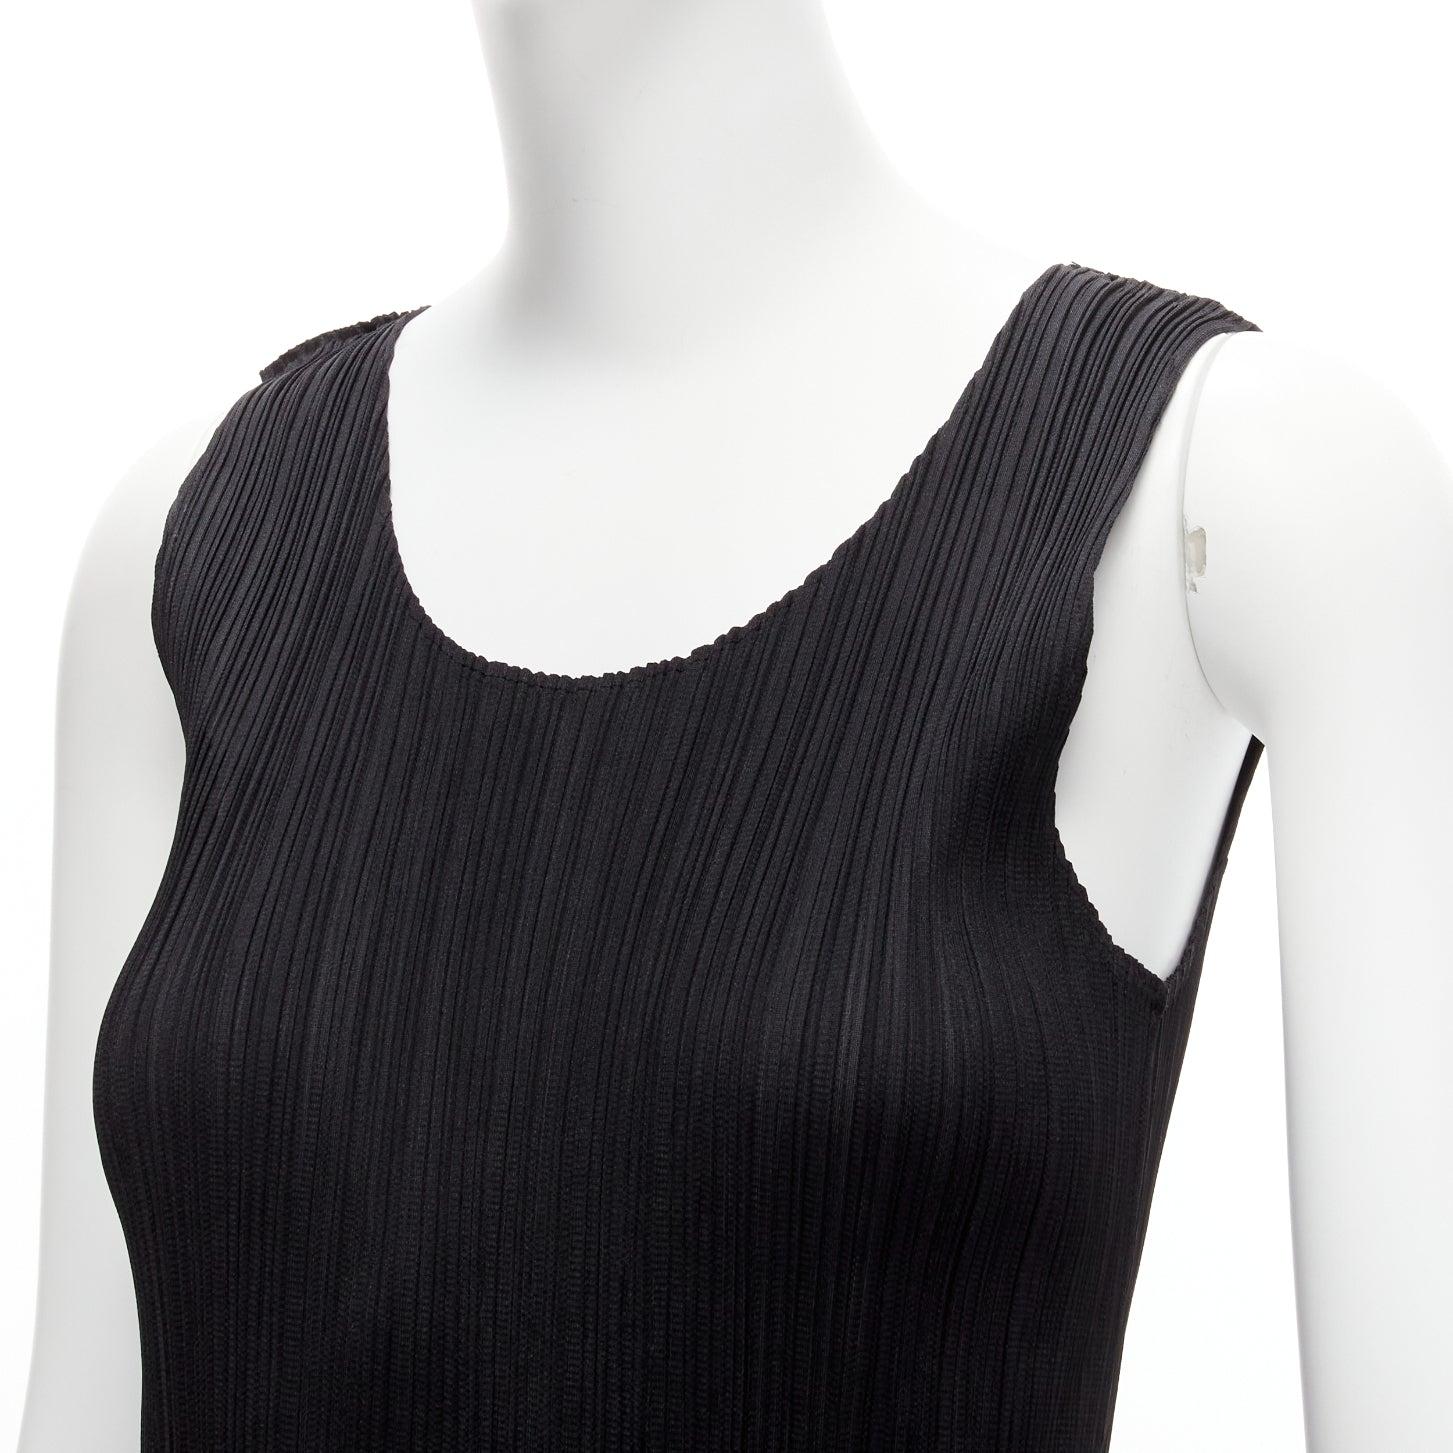 ISSEY MIYAKE Pleats Please Vintage black plisse round neck tank top JP3 L
Reference: PYCN/A00088
Brand: Issey Miyake
Collection: Pleats Please
Material: Polyester
Color: Black
Pattern: Solid
Closure: Pullover
Made in: Japan

CONDITION:
Condition: